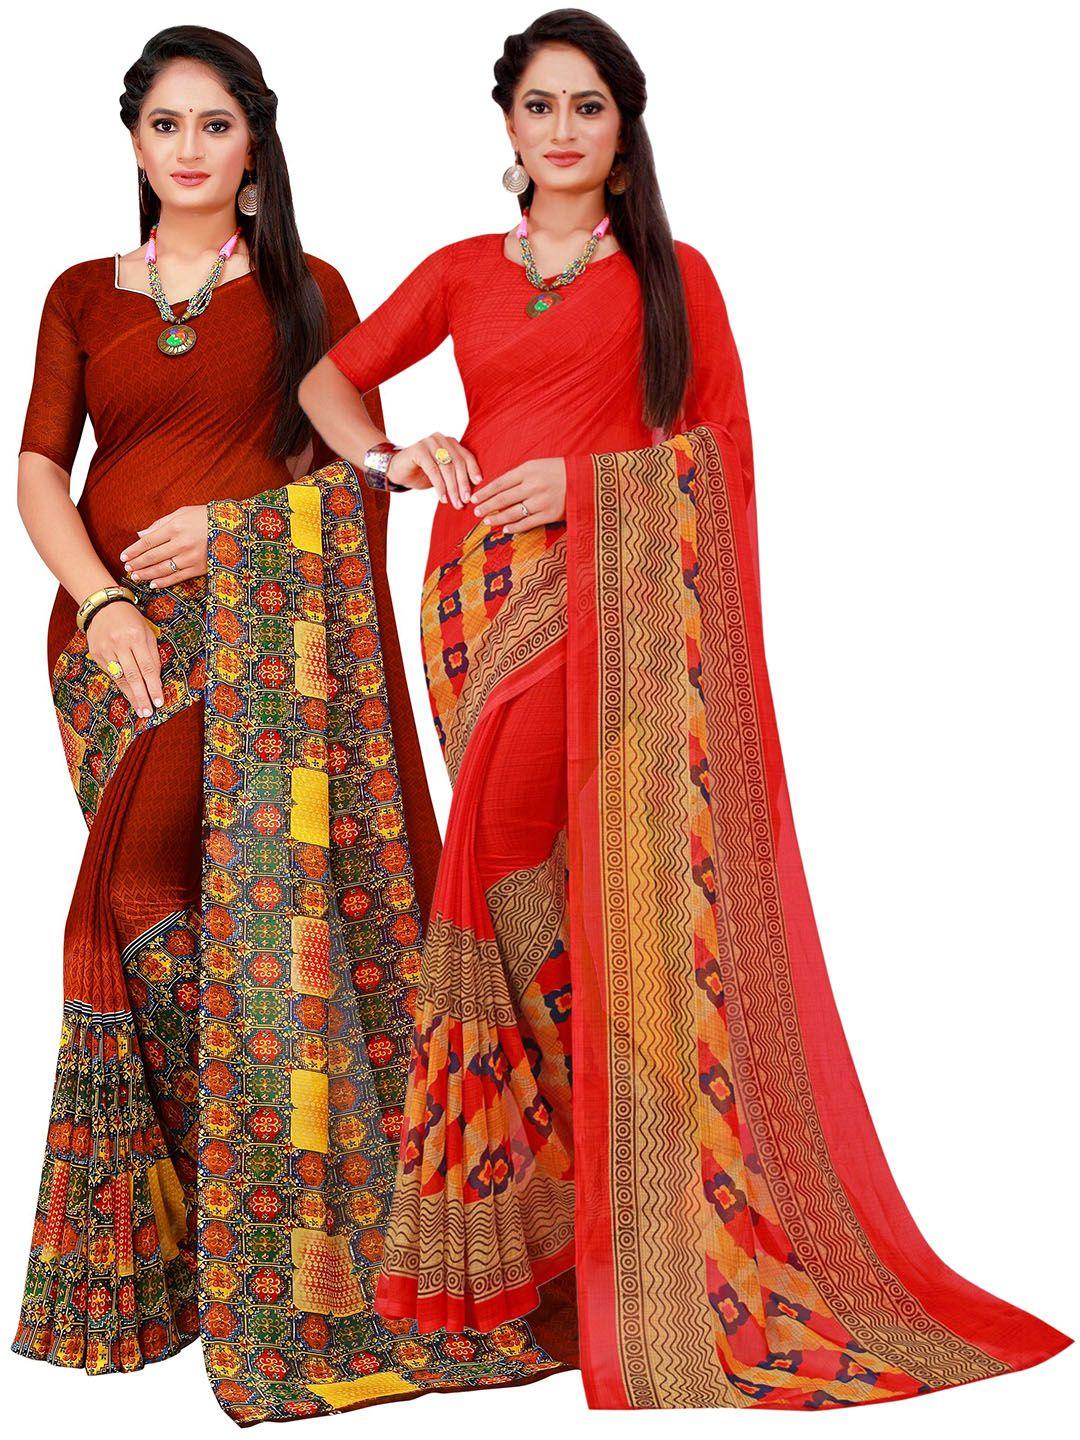 kalini pack of 2 red & maroon ethnic motifs pure georgette sarees